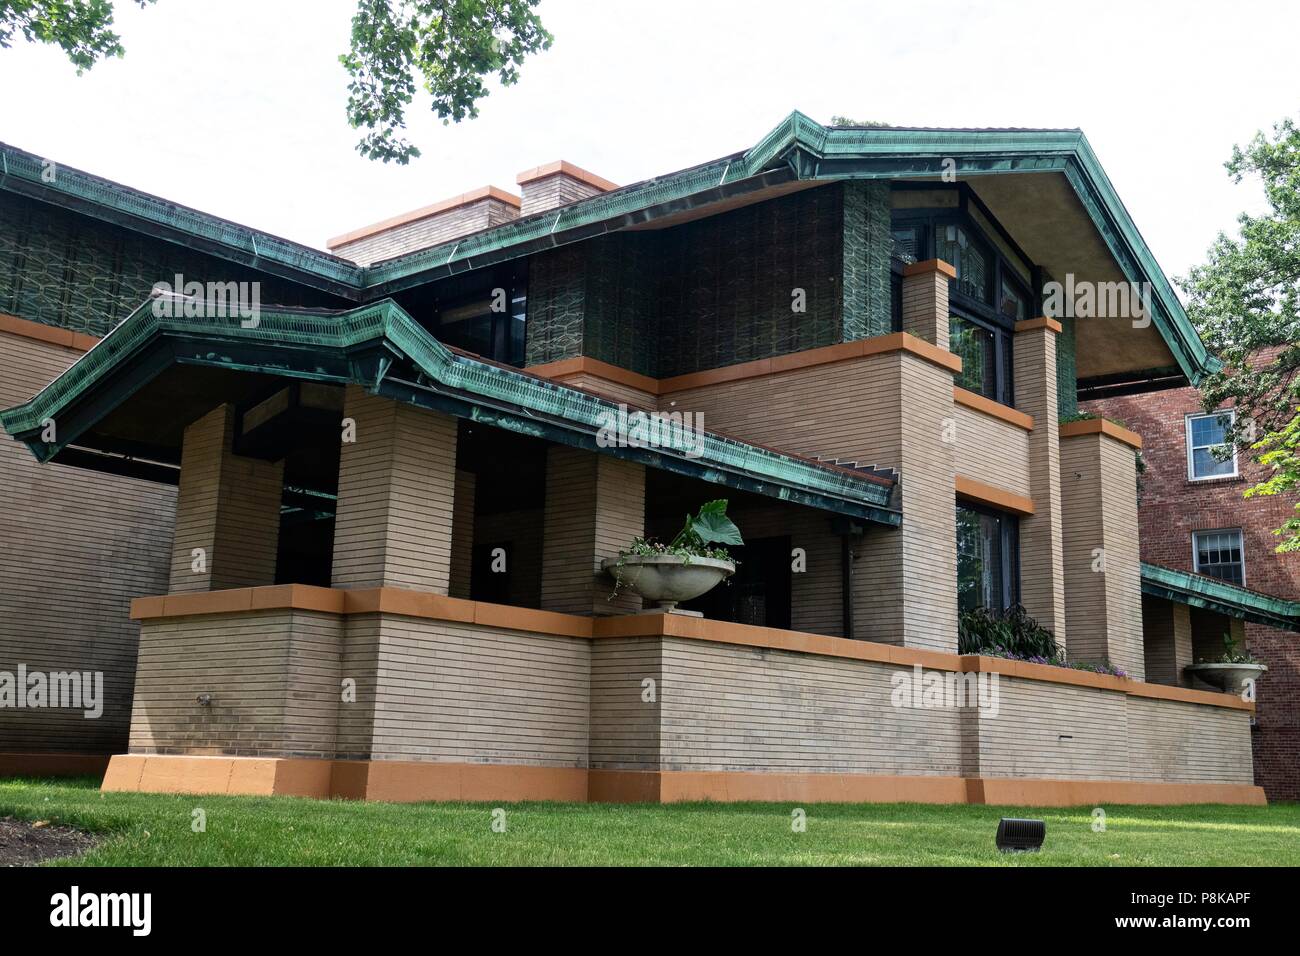 This fine example of Frank Lloyd Wright prairie style architecture was commissioned by the wealthy widow, Susan Lawrence Dana in 1902 and is a major t Stock Photo